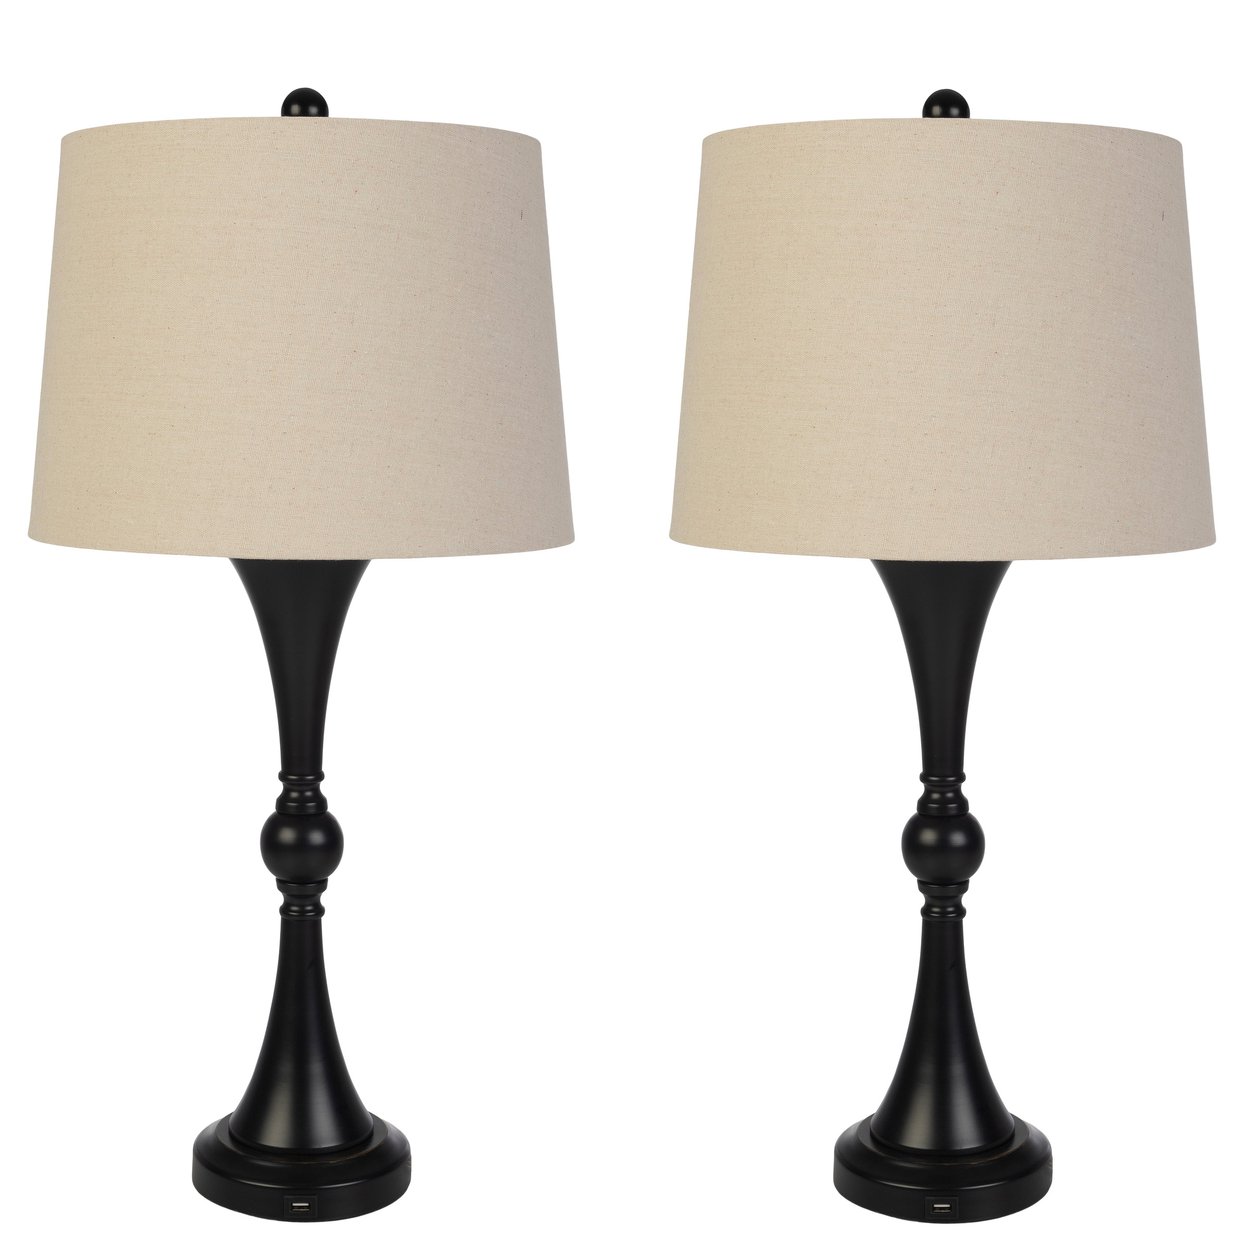 Set Of 2 Table Lamps USB Charging Ports Touch Control LED Bulbs Room Black